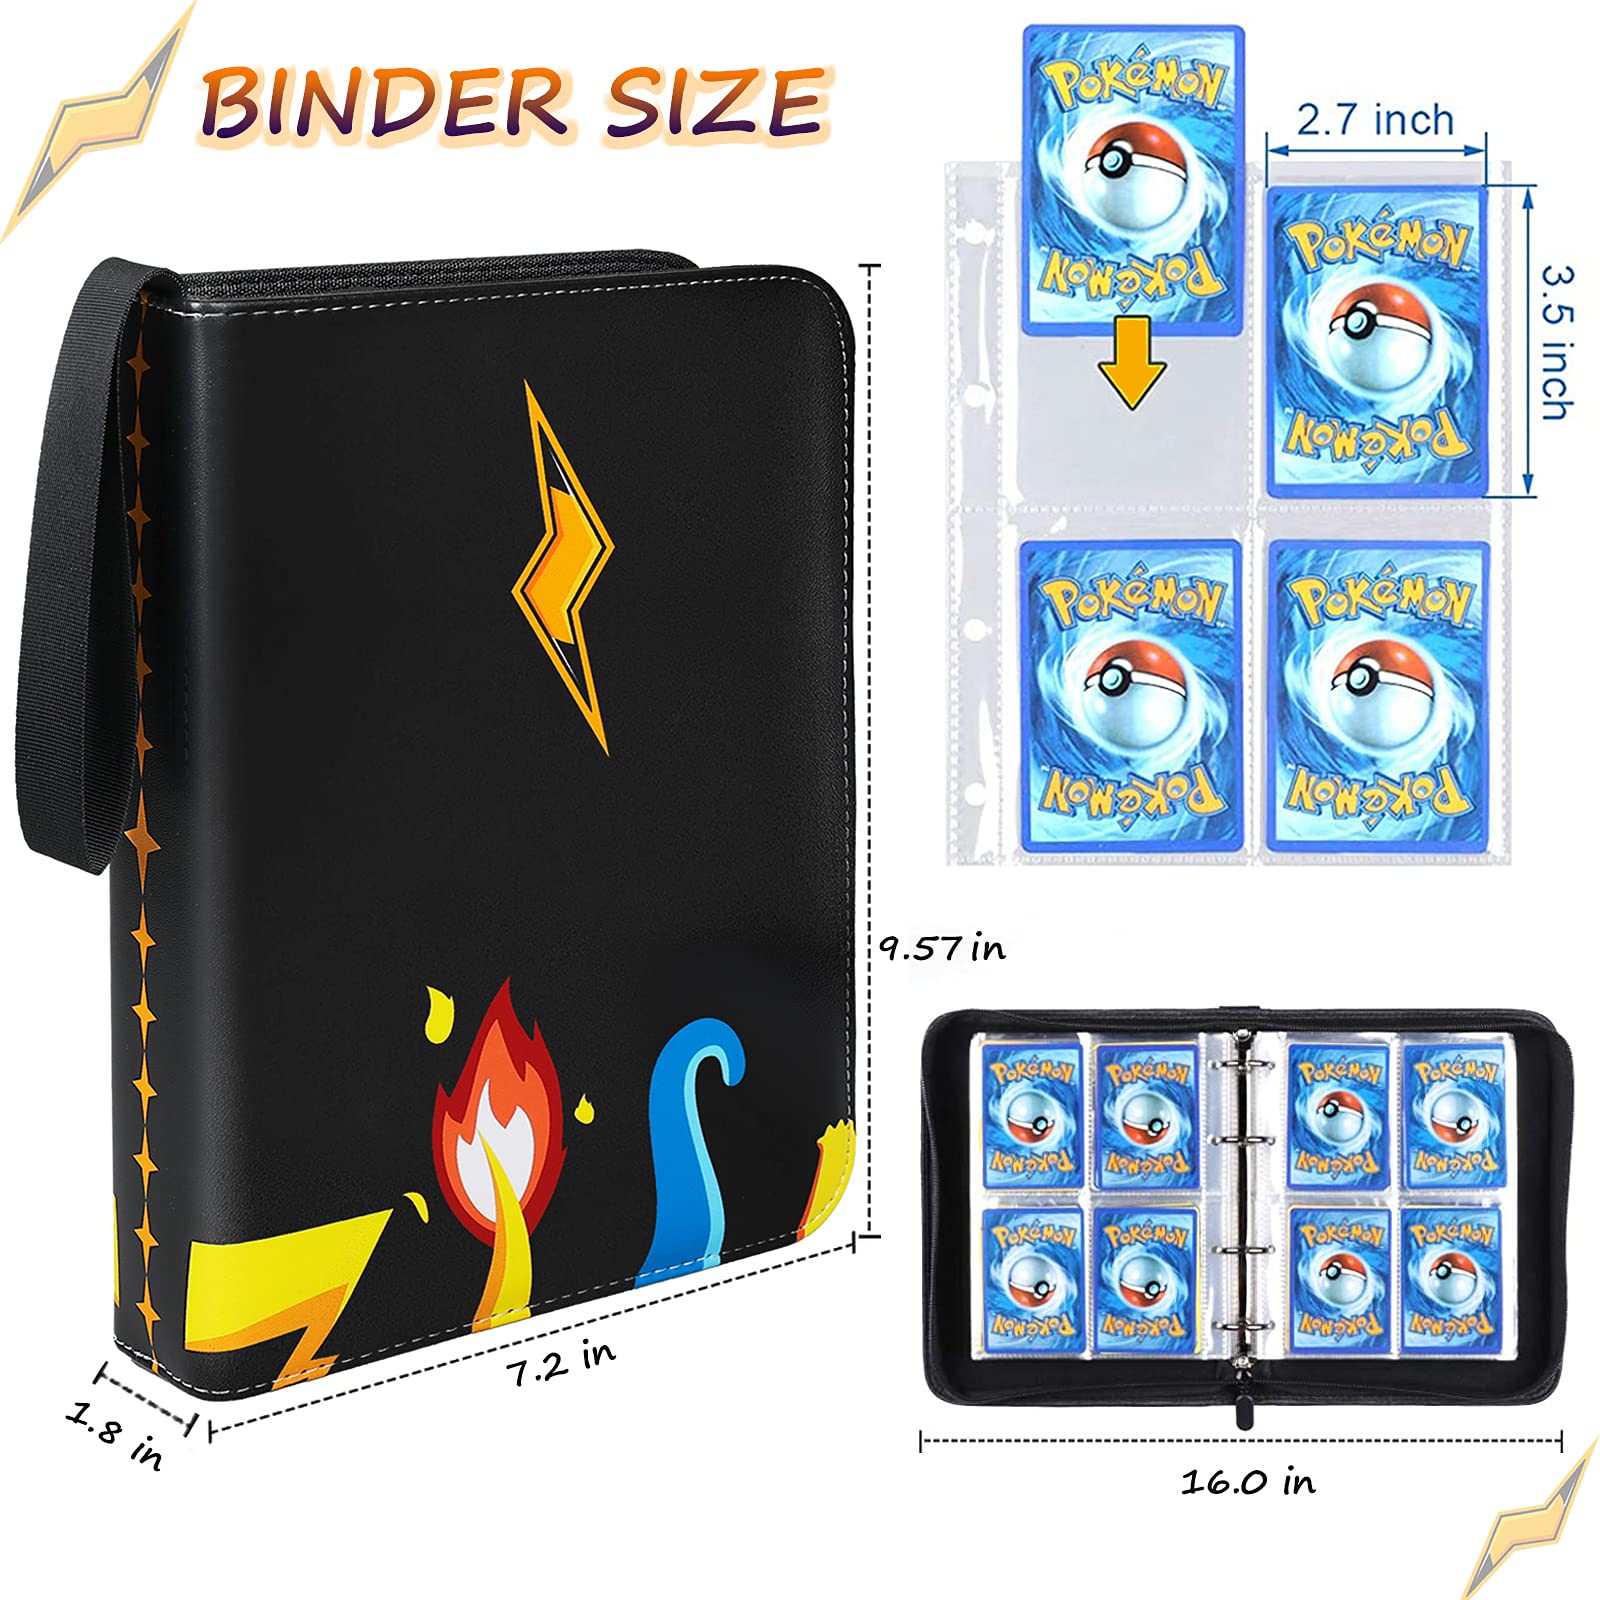 4-Pocket Binder for Pokemon Cards, Pokemon Card Binder with 50 Removable Sheets Holds 400 Cards, Trading Card Binder for Card Collector Album Holder Storage Book Folder-Toys Gifts for Boys Girls